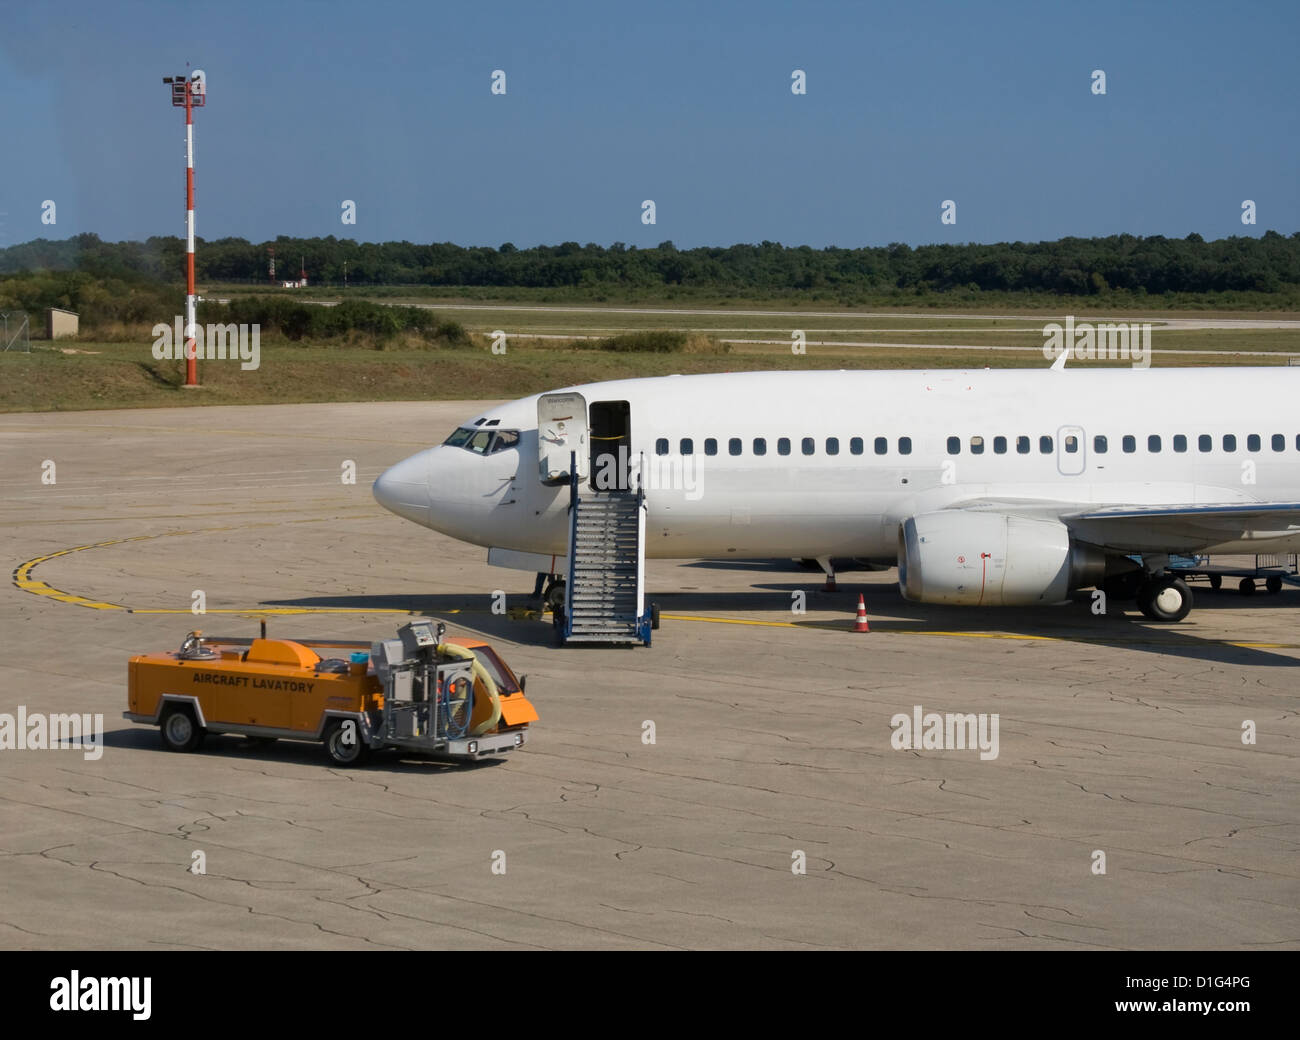 Plane parked at the airport with support car Stock Photo